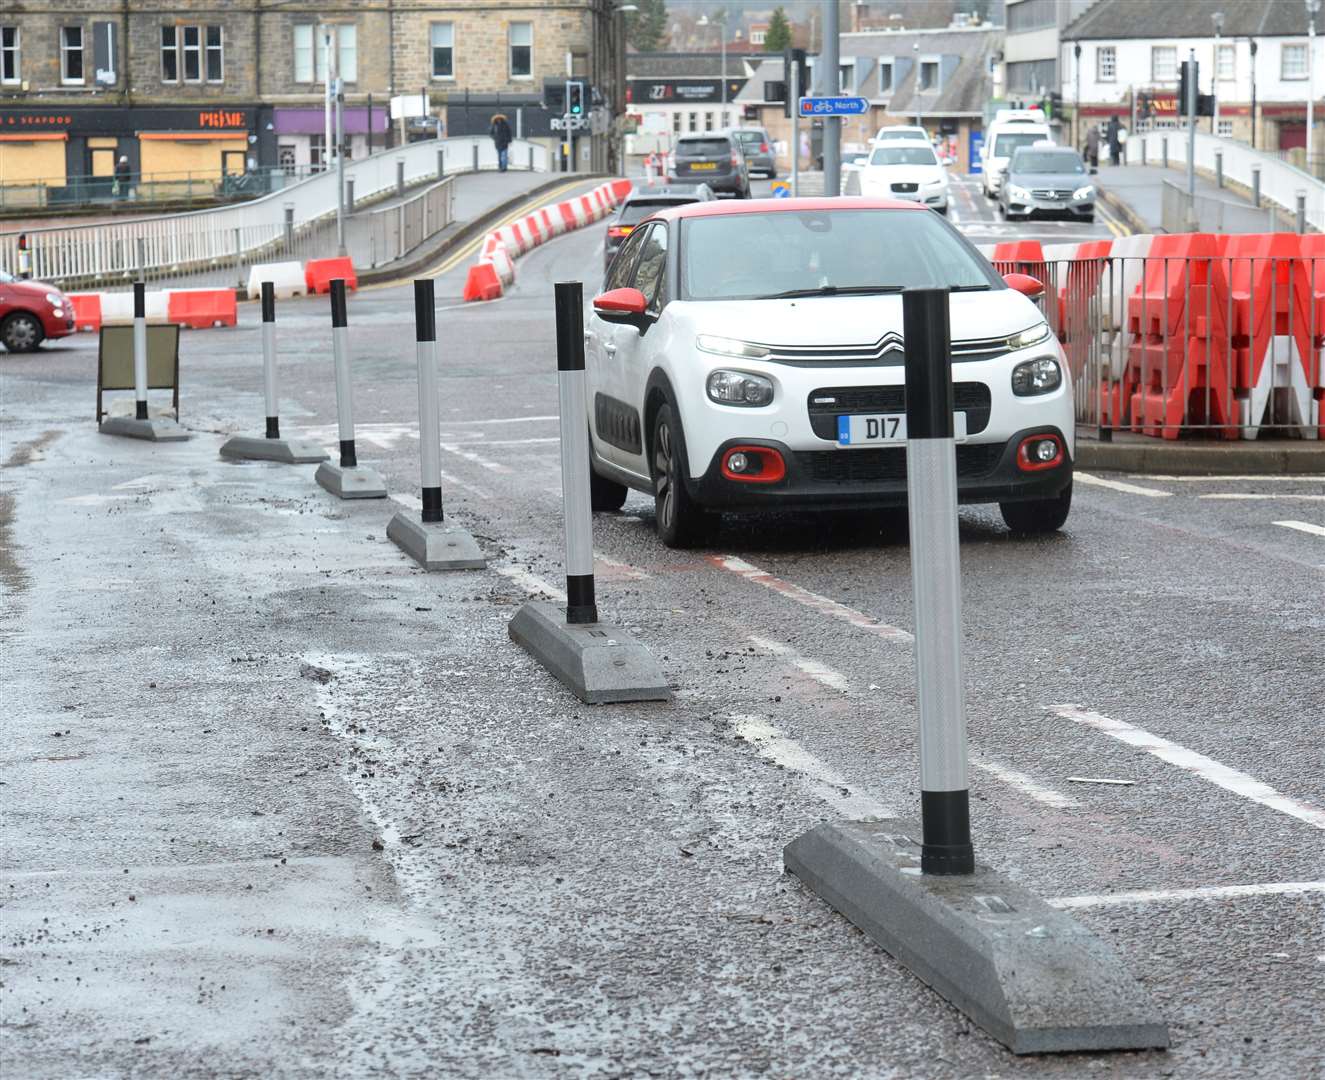 New poles are replacing plastic distancing barriers on Bridge Street. Picture: Gary Anthony